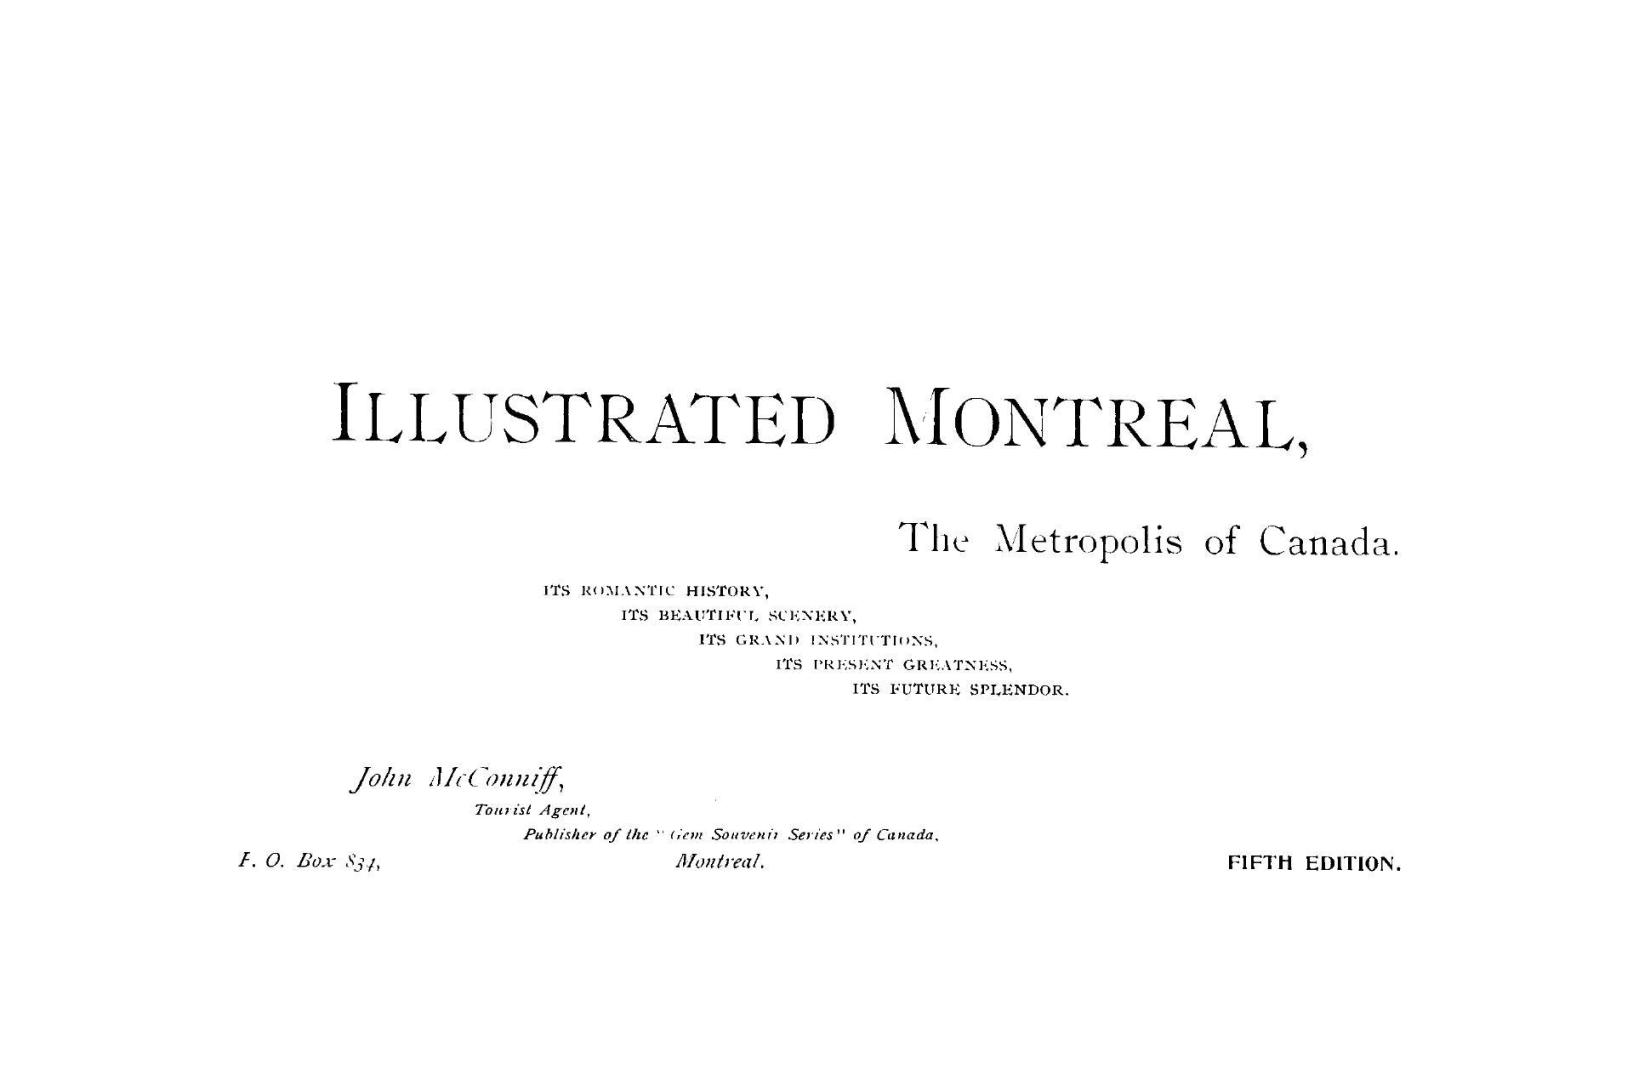 Illustrated Montreal, the metropolis of Canada